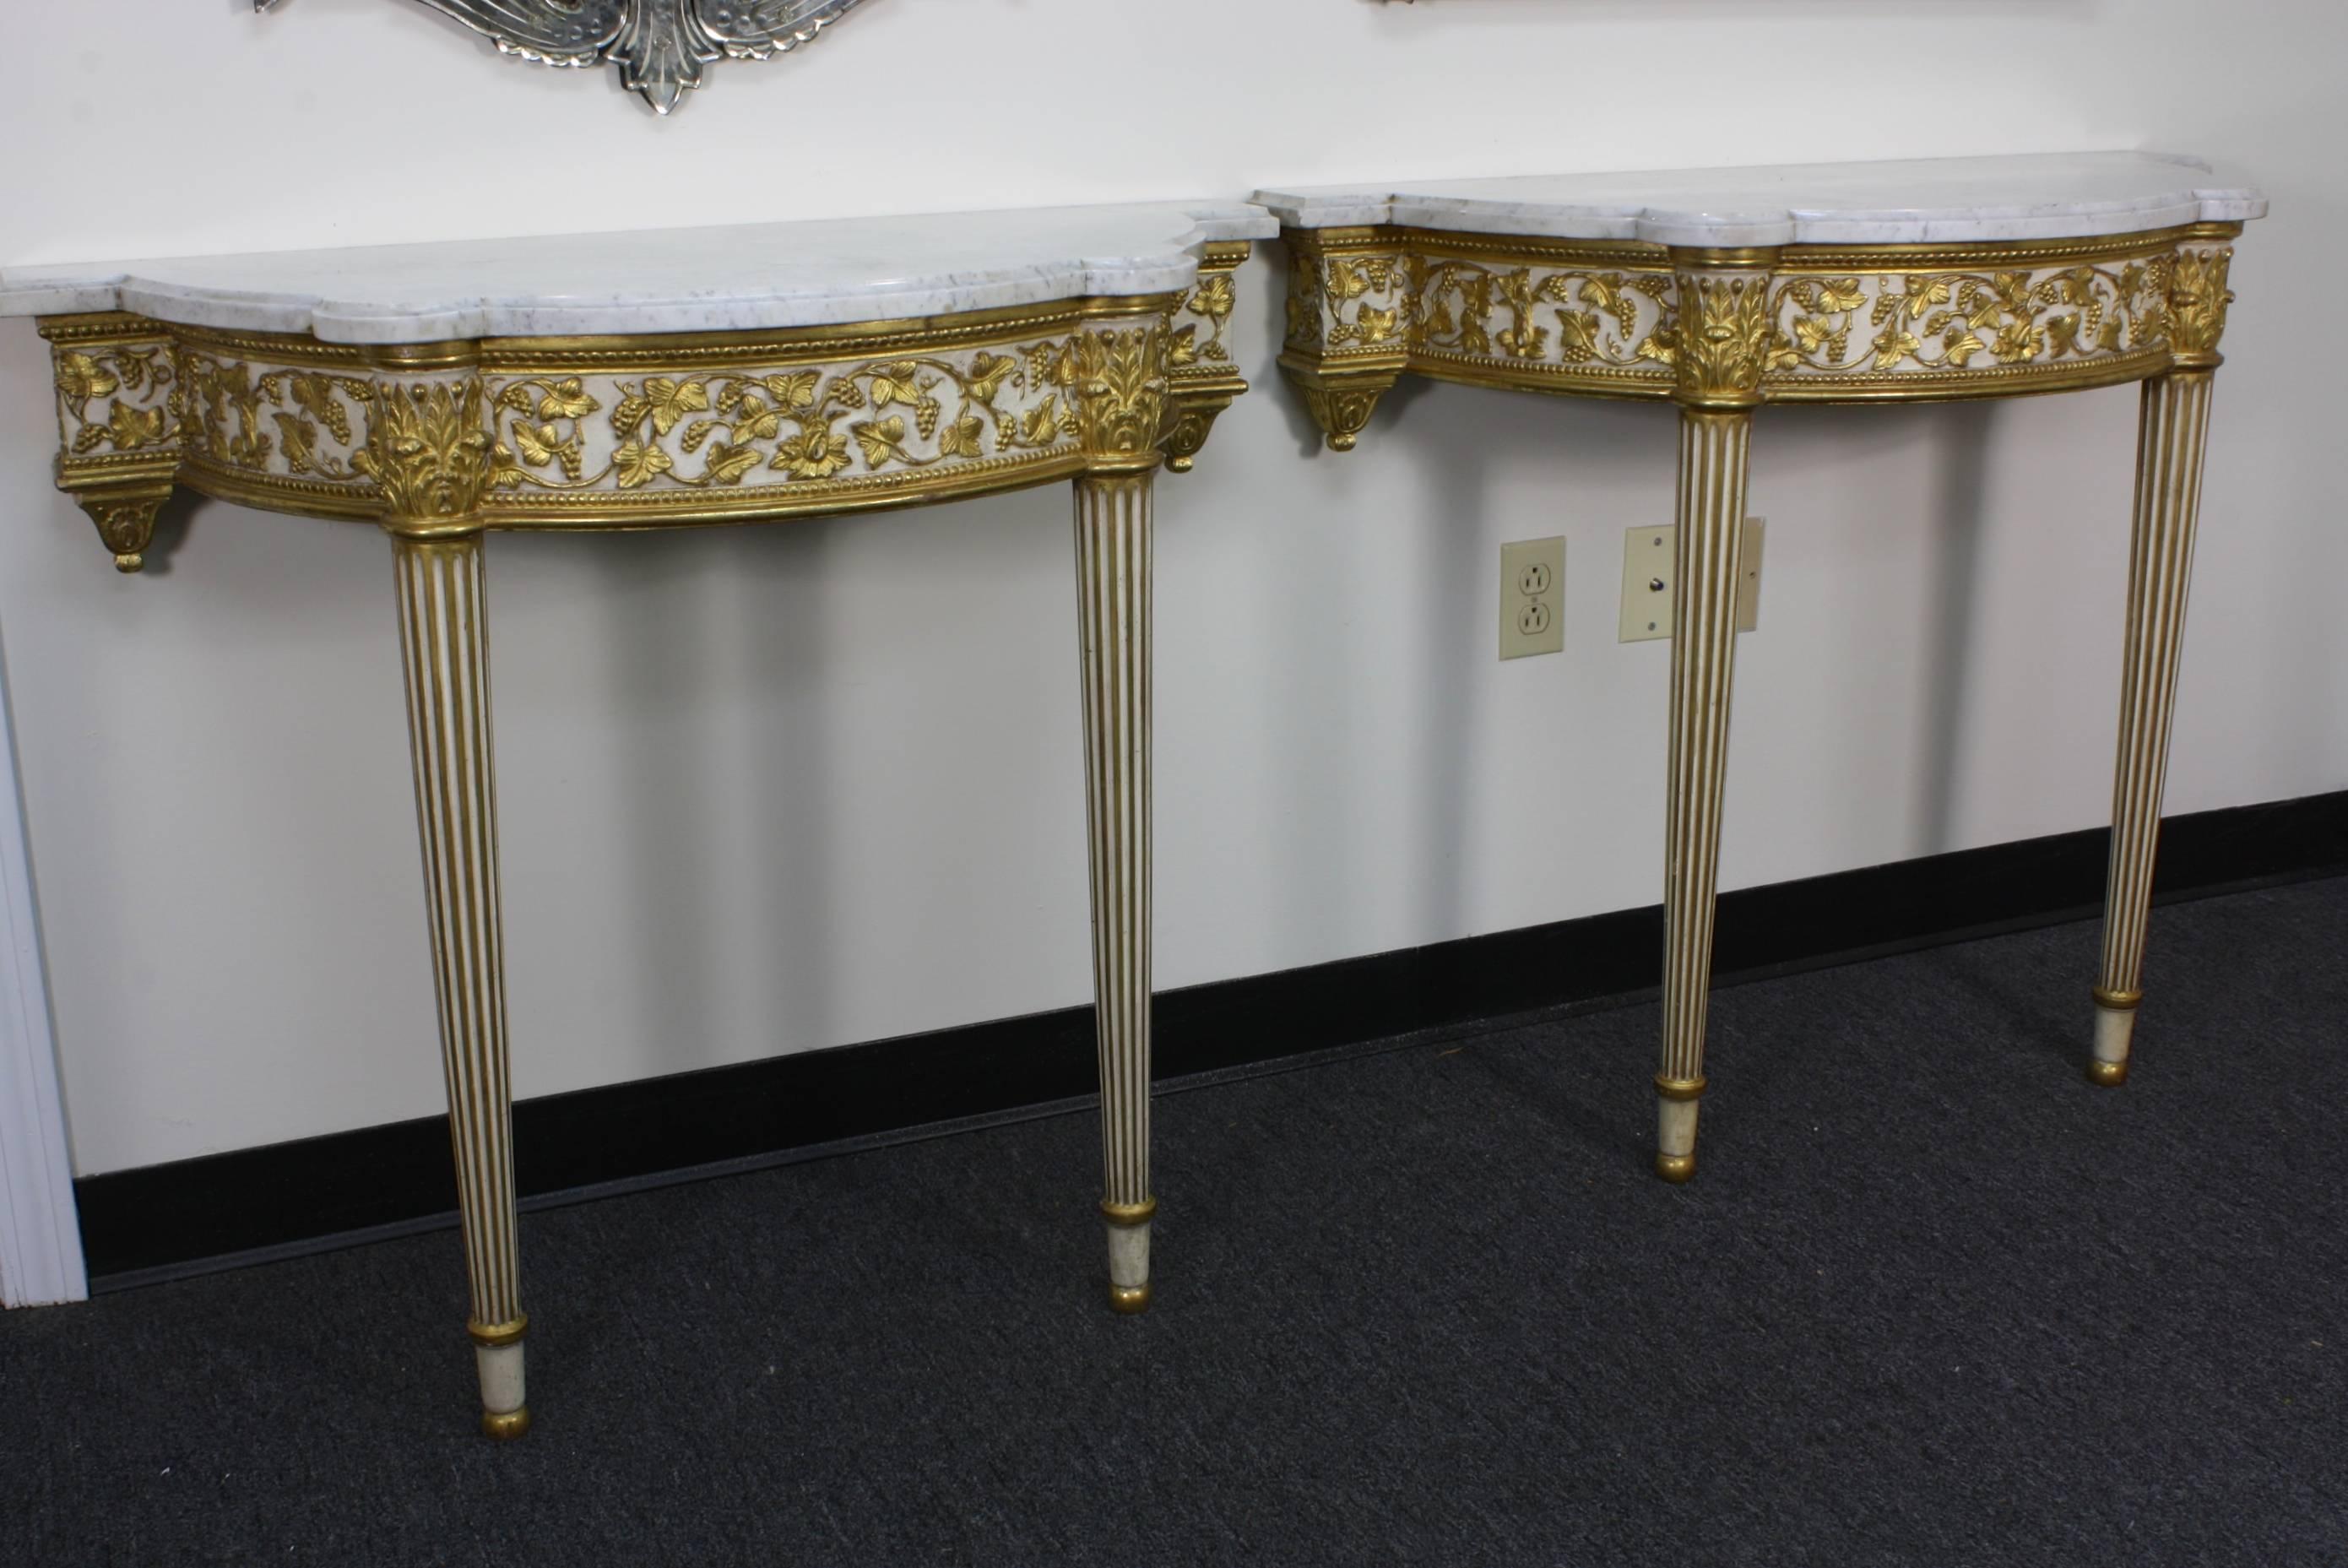 A lovely pair of French white-painted and gilded console tables, with Carrara marble tops, in the Louis XVI style (early 20th century). The raised gilded decoration is highly-detailed, featuring grape vines and leaves, and the legs are tapered and